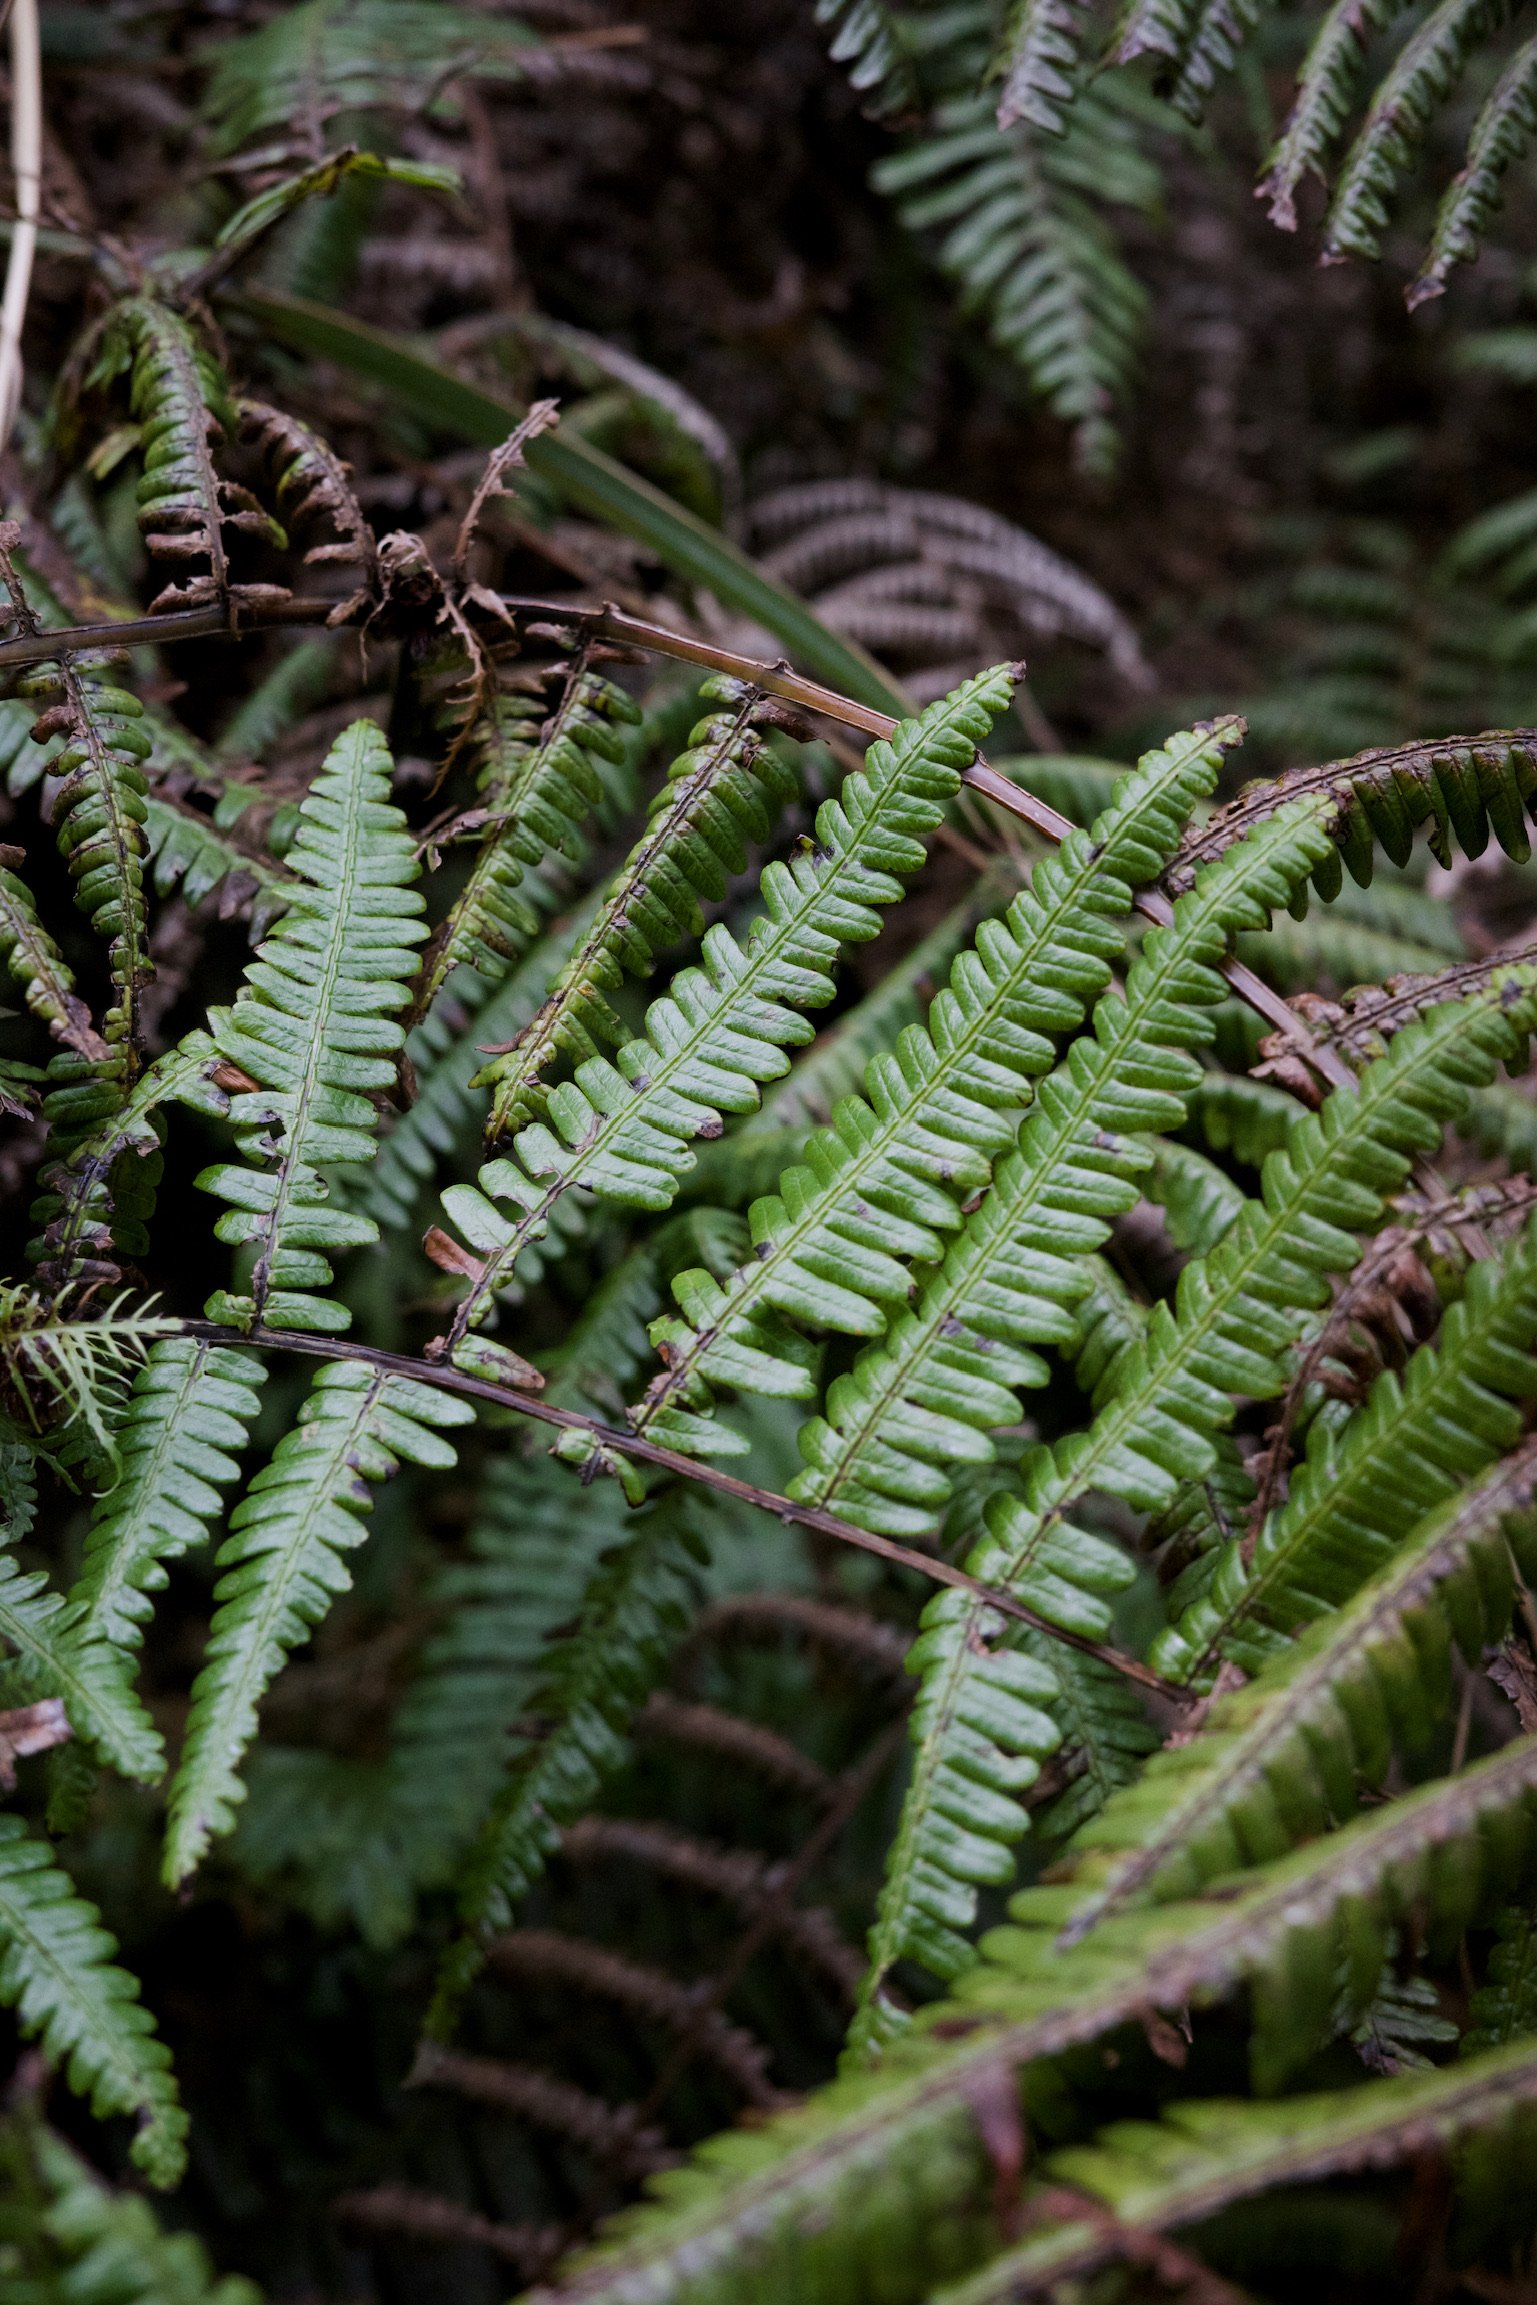 A fern plant looking healthy and thick.